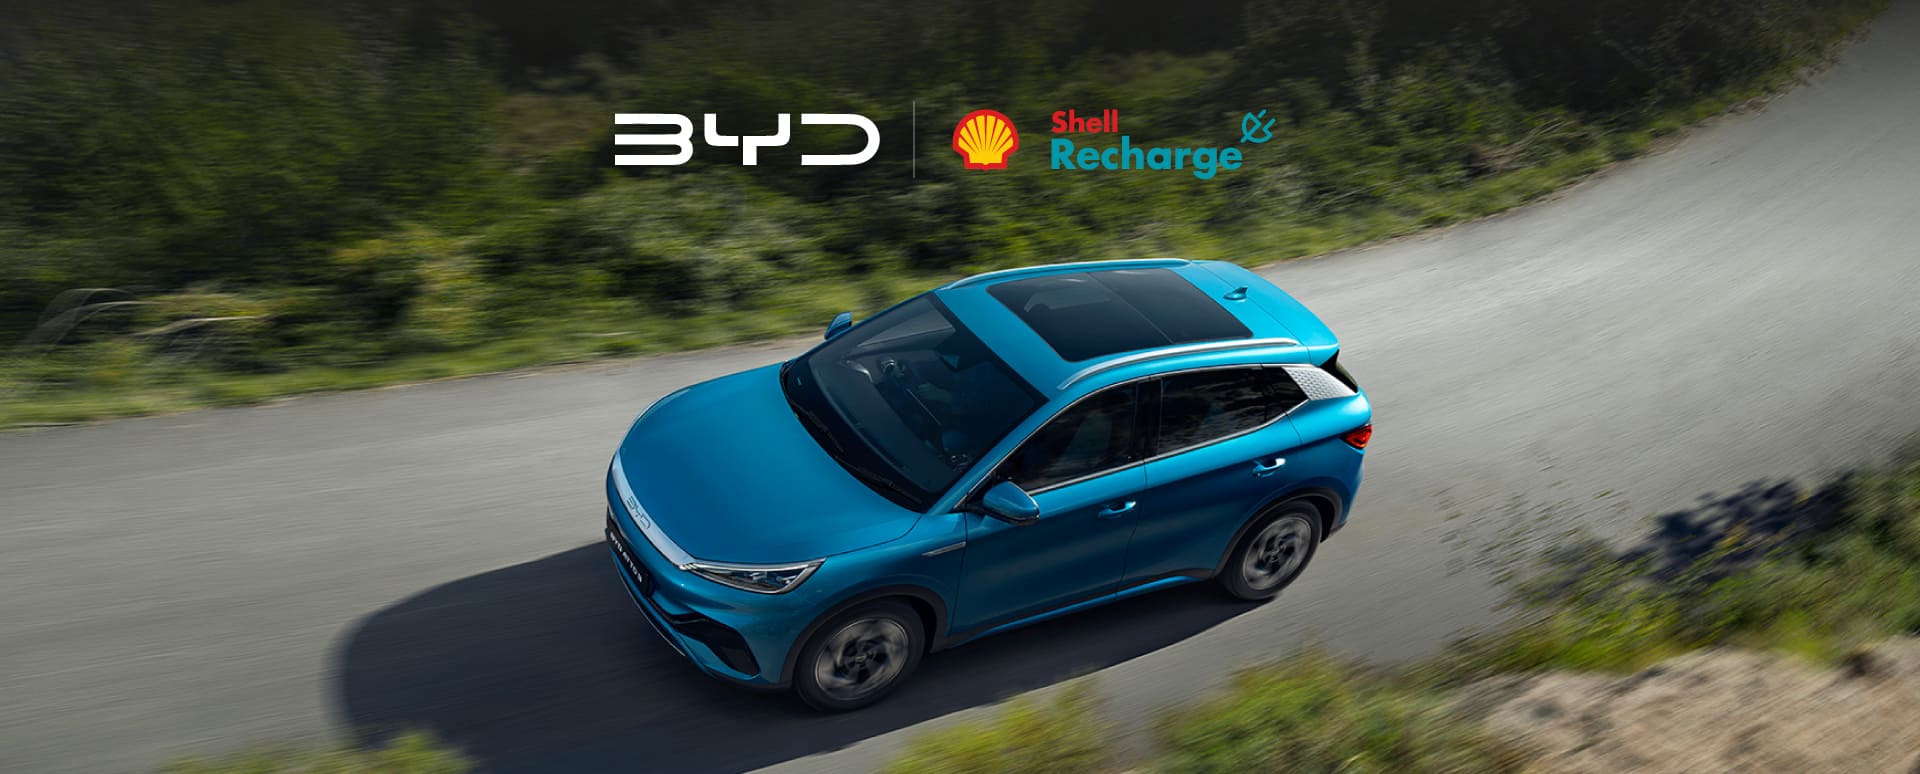 BYD Shell Recharge Promotion